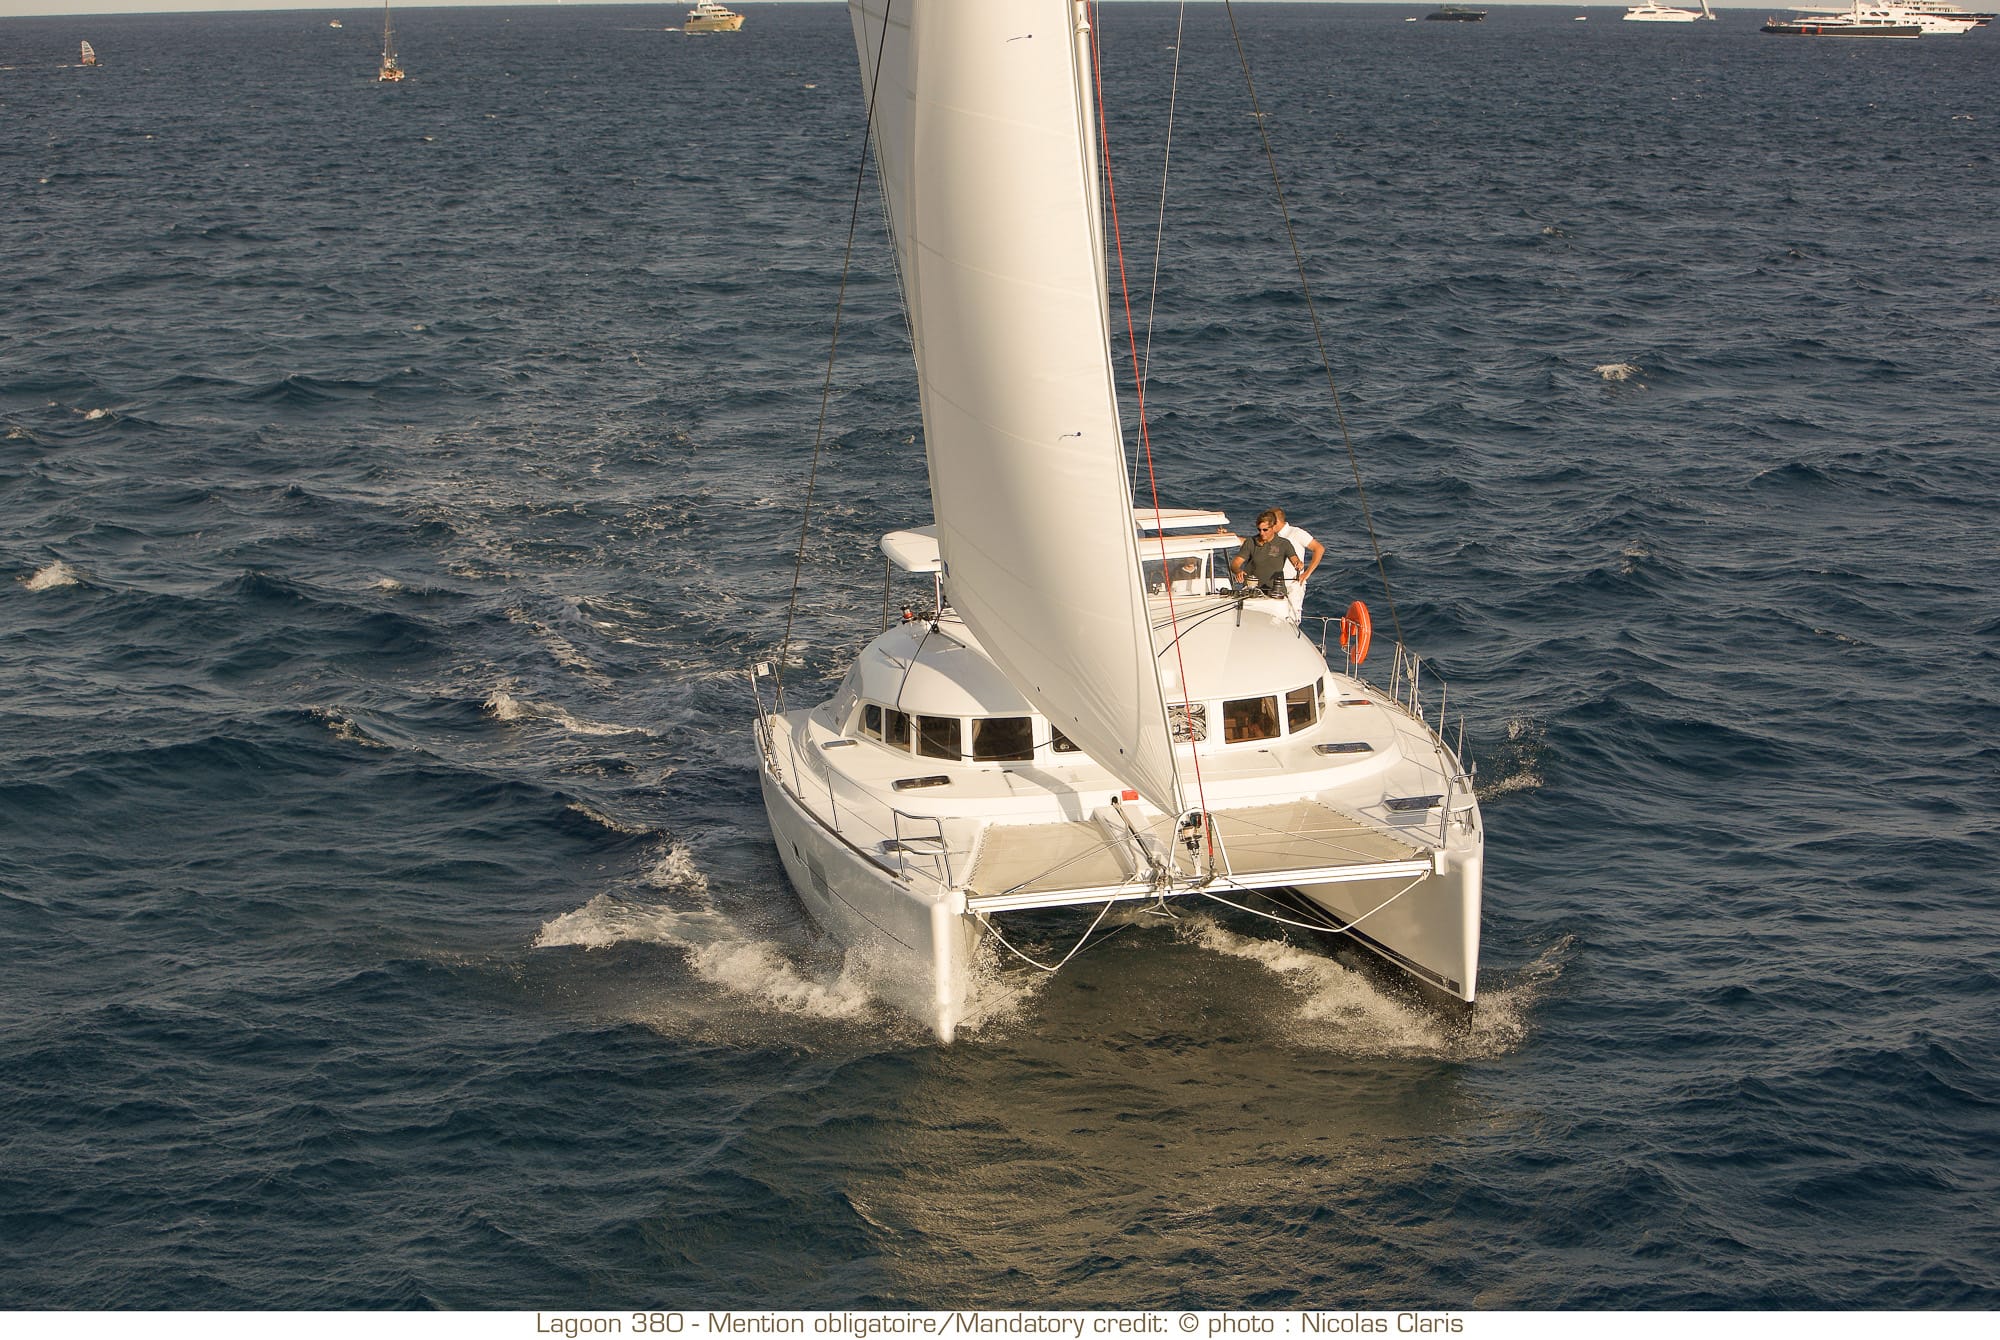 lagoon 380 bareboat catamaran charters available with captain, chef, or provisioning